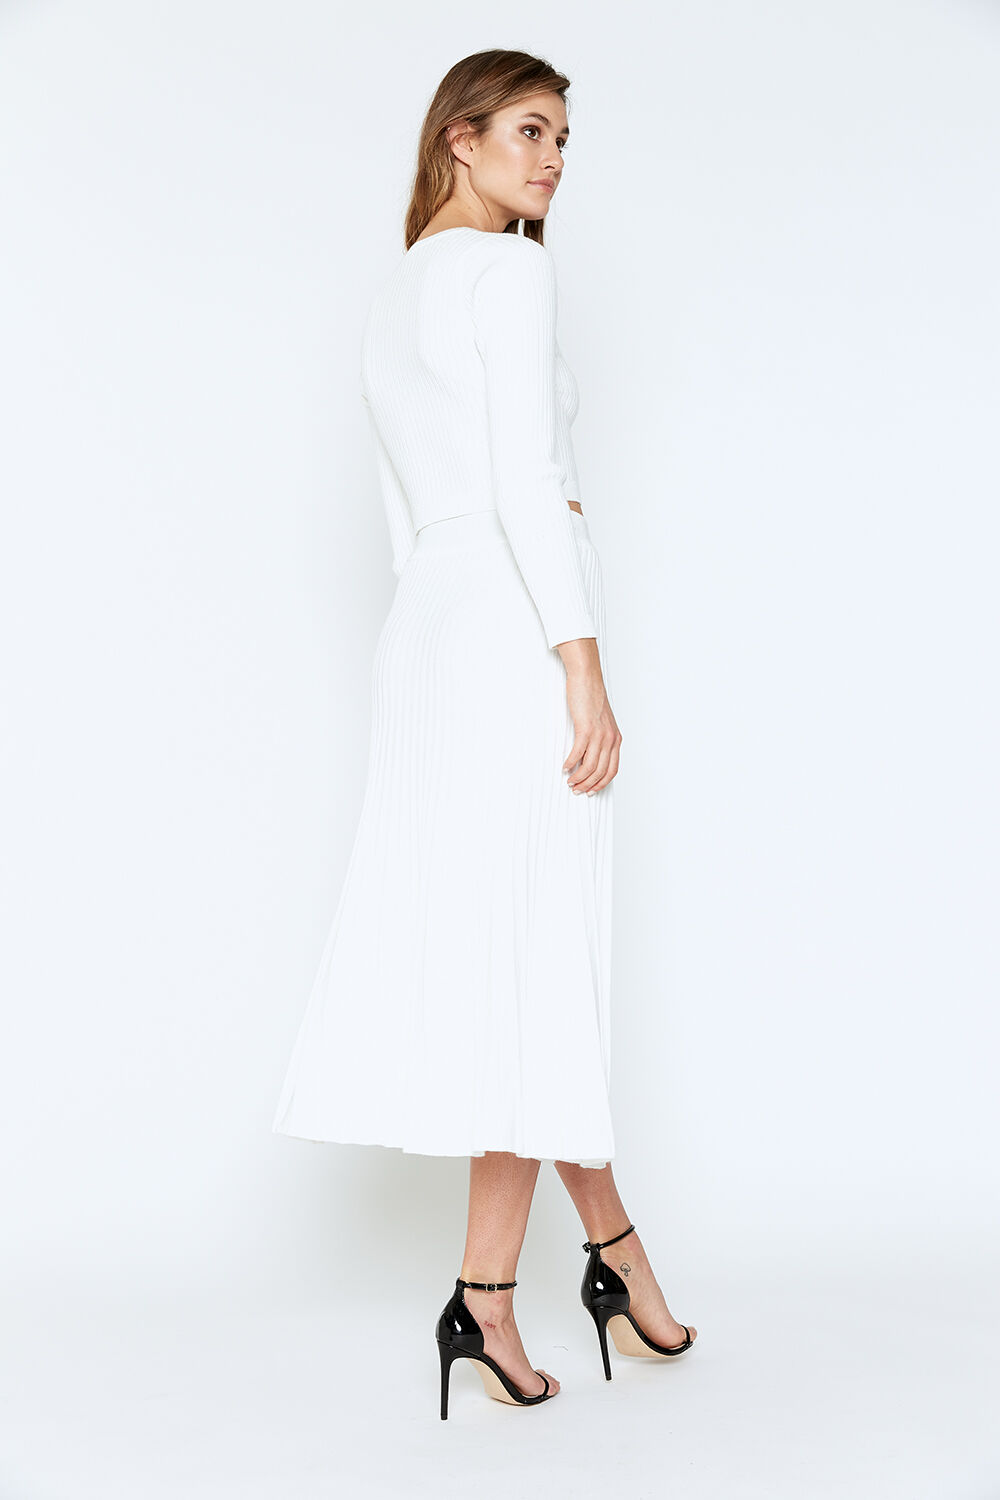 RIBBED BUTTON SKIRT in colour CLOUD DANCER